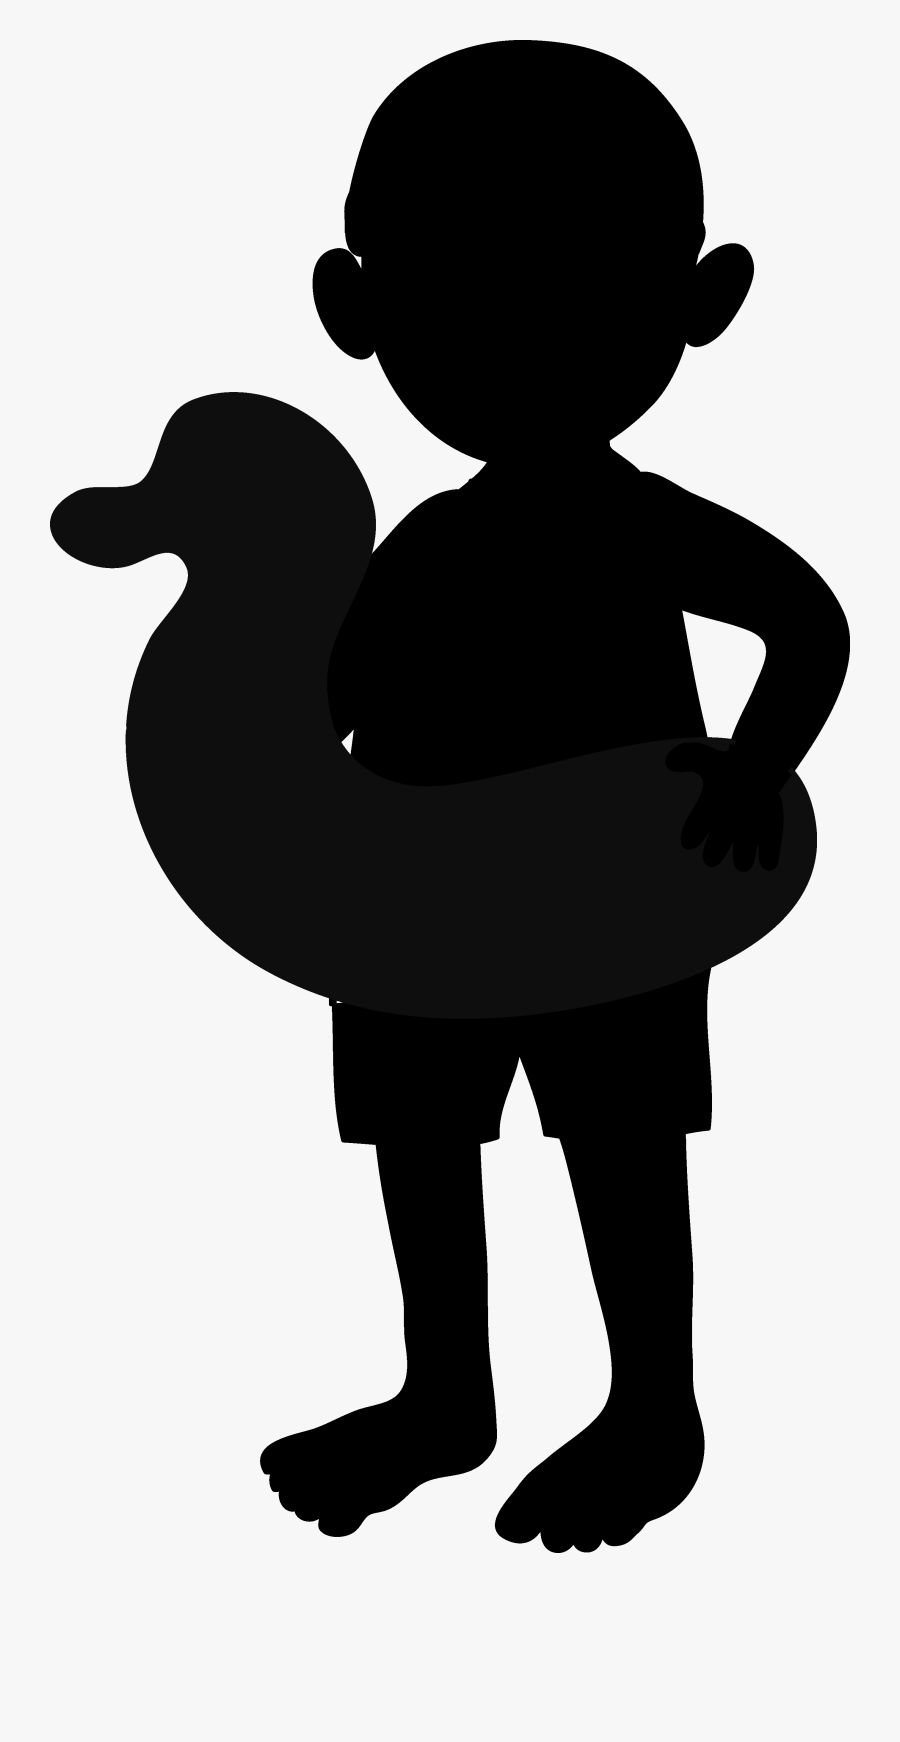 A Pool Party Is A Summer Classic Bring Your Floaties - Spy Silhouette Png, Transparent Clipart